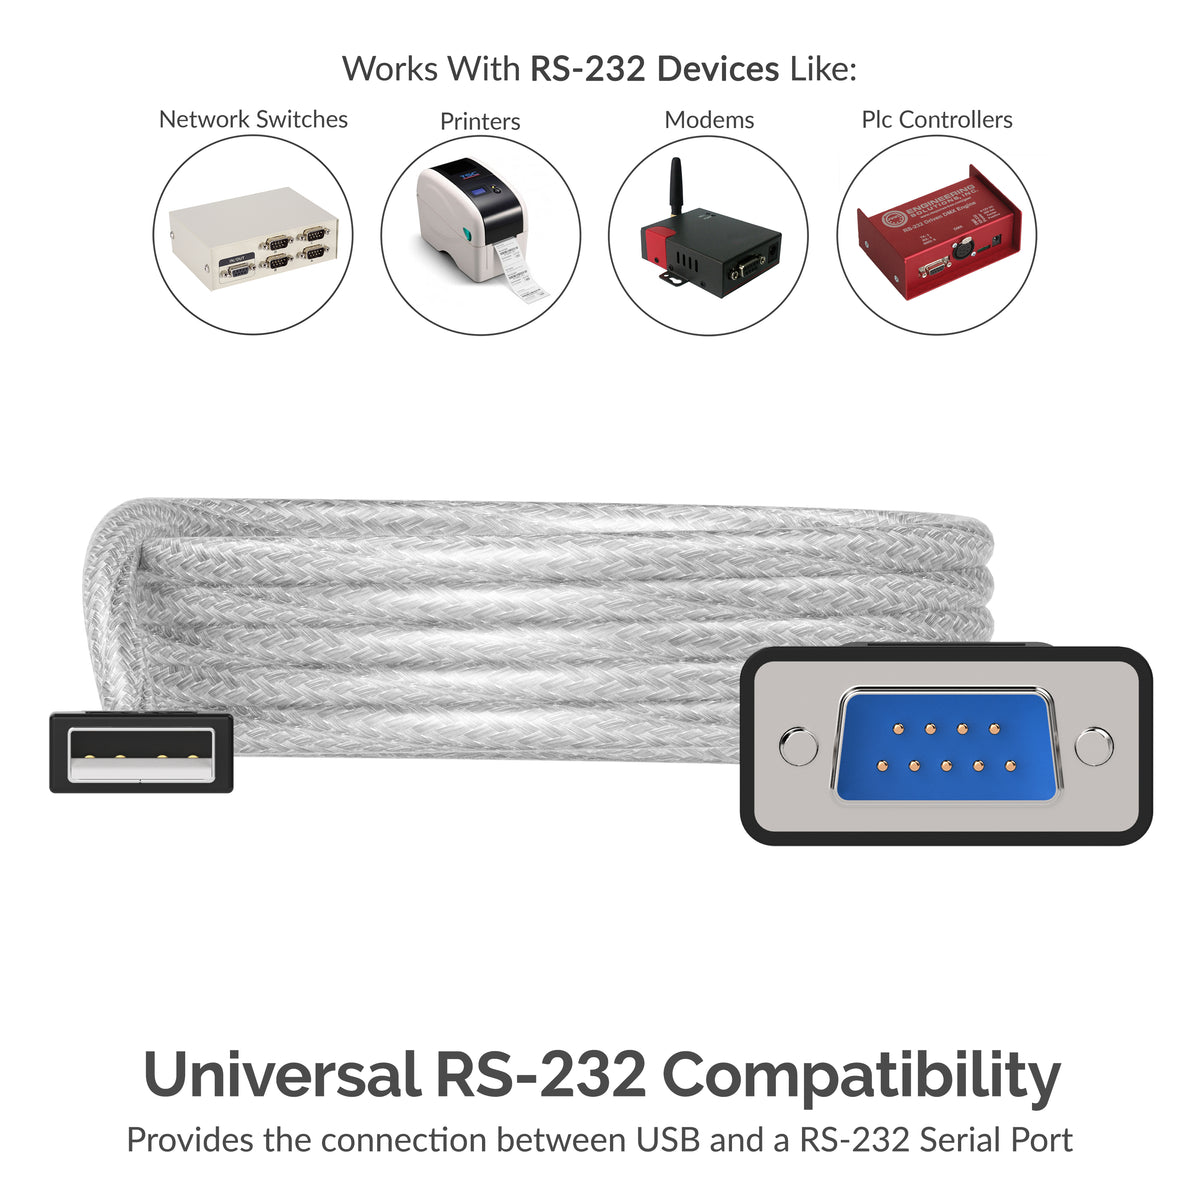 USB to RS-232 DB9 Serial 9 pin Adapter (Prolific PL2303)